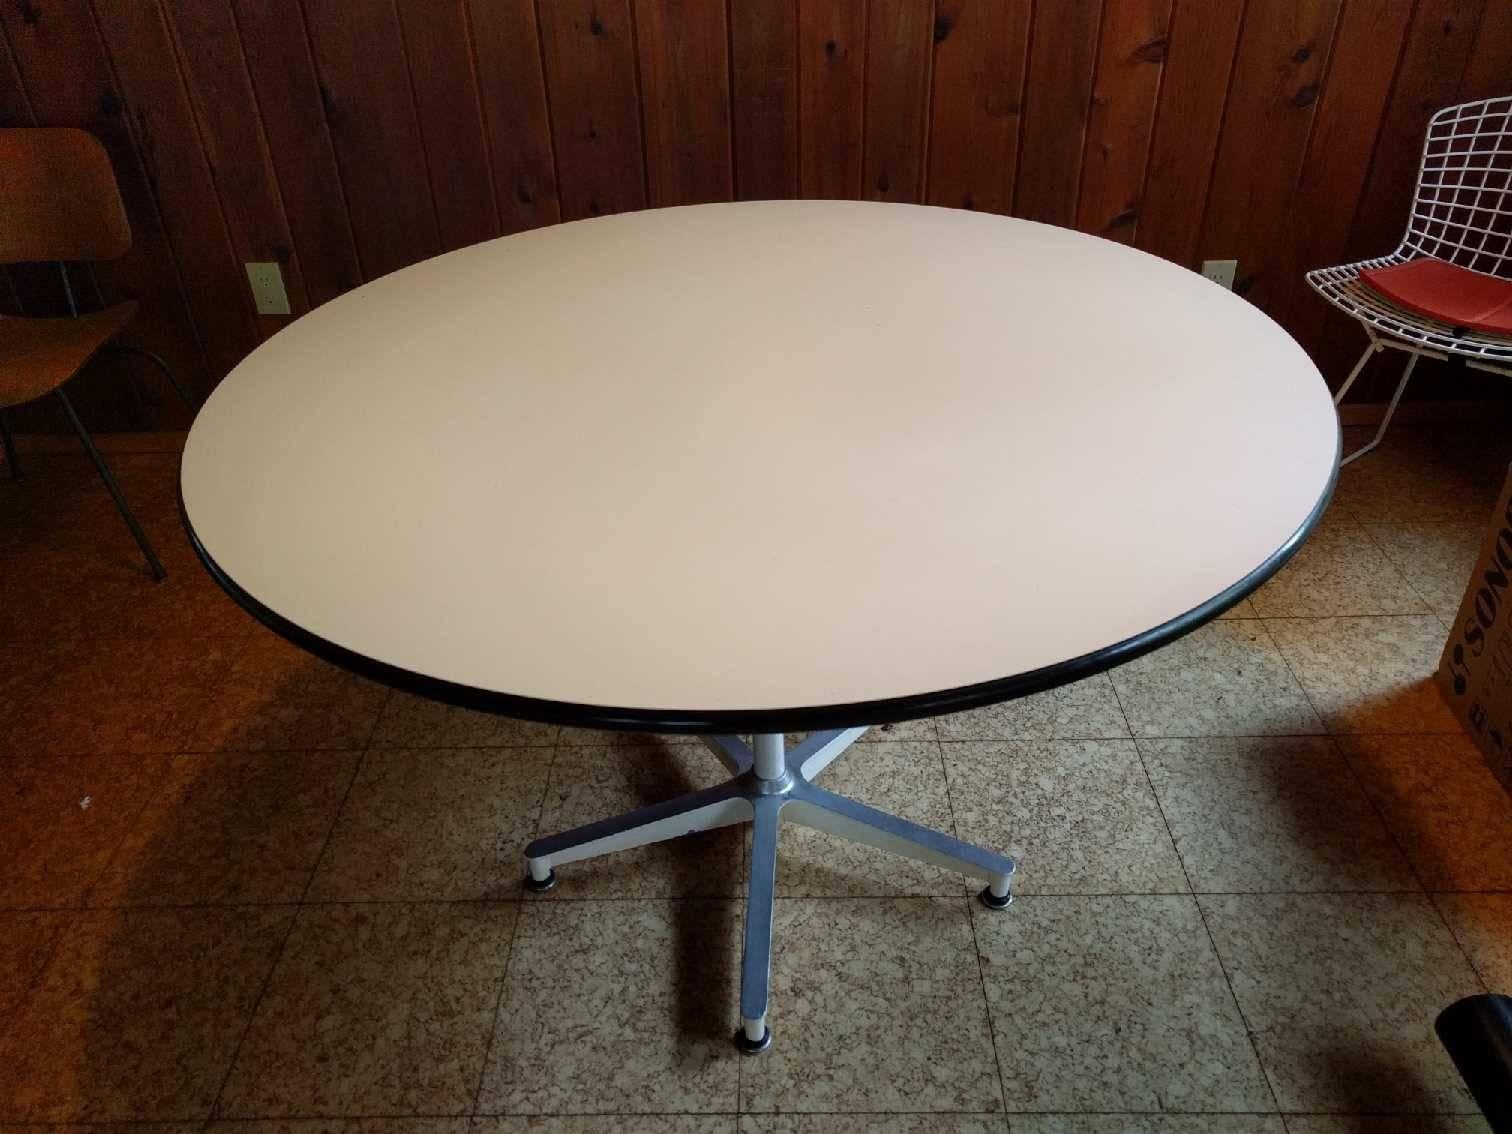 Rare early Eames for Herman Miller 650 model dining table. Same five star aluminum base as found on the Eames lounge chair. White laminate top. Only produced this way for a few years. Rare white column and base. The only example we have ever come